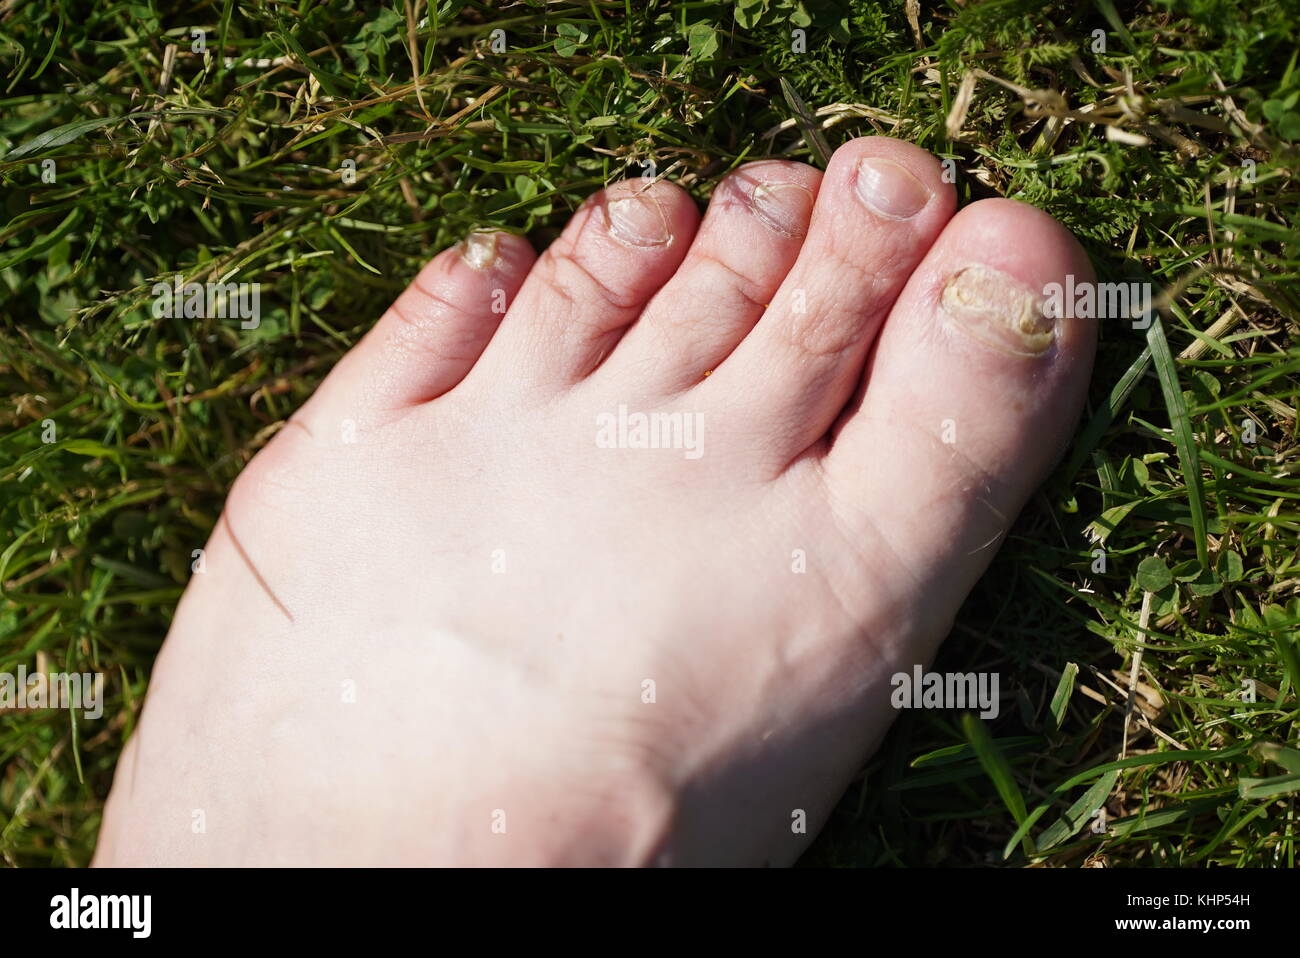 Onychomycosis. Fungal infection of nails of feet Stock Photo